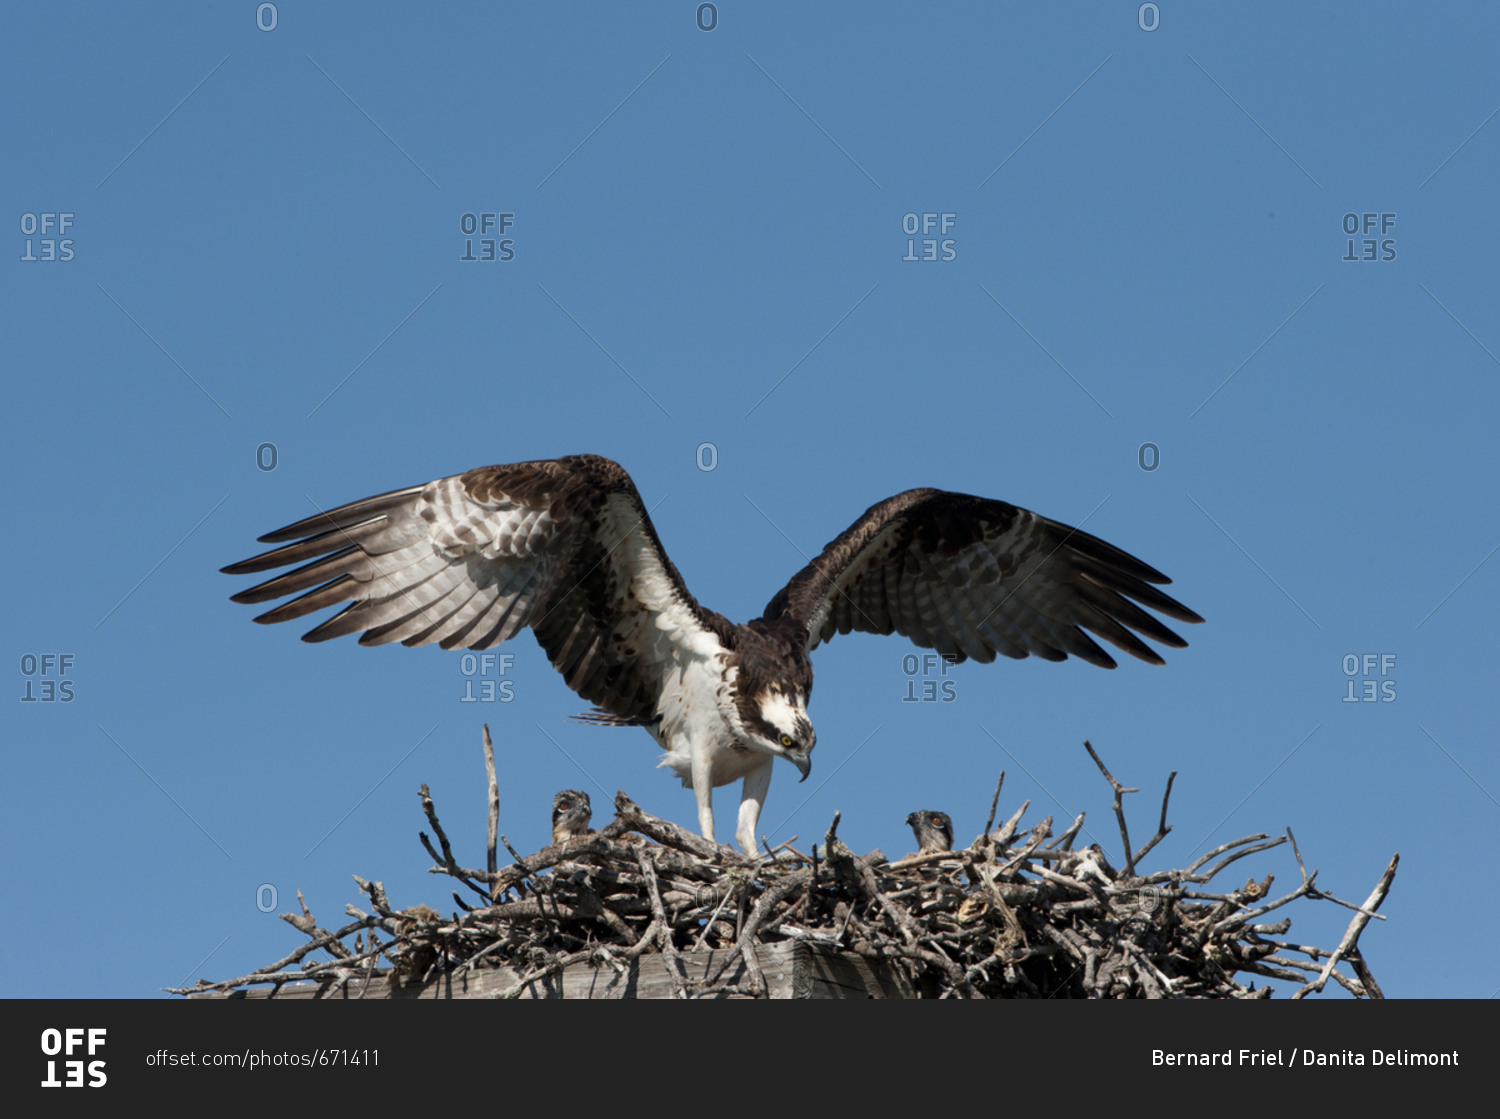 USA, Florida, Sanibel Island, Ding Darling NWR, Osprey nest with adults and two chicks